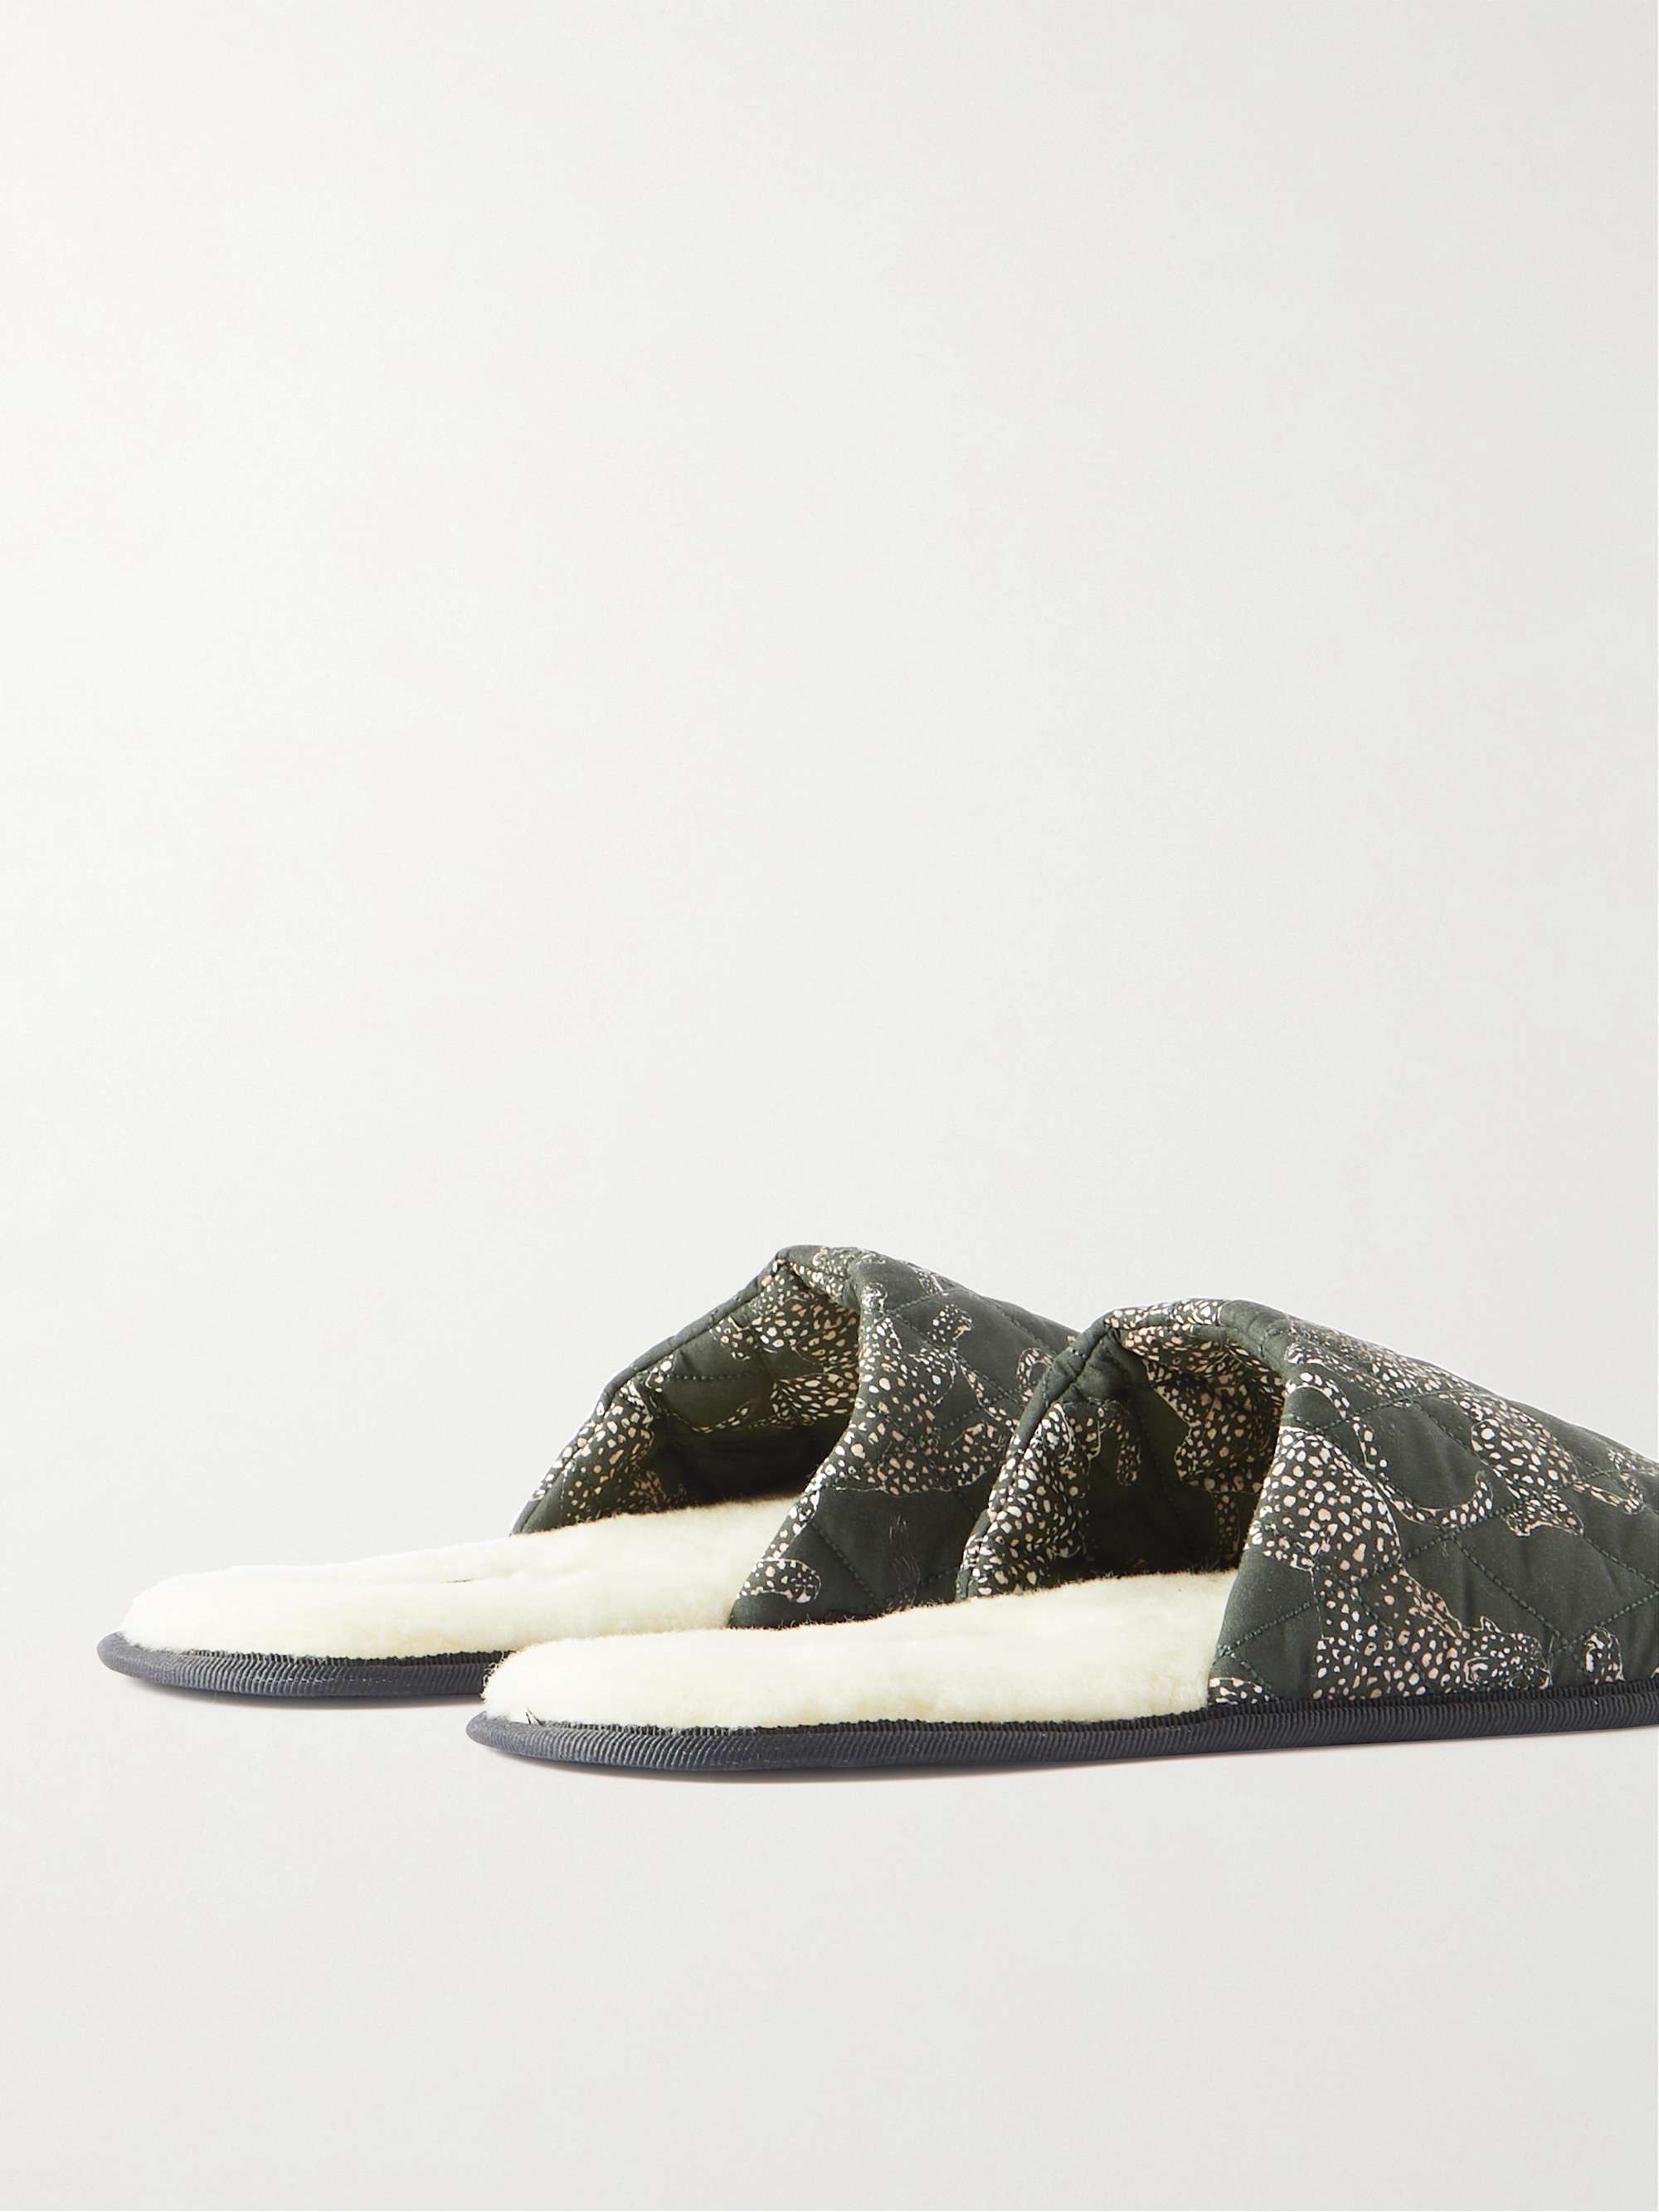 DESMOND & DEMPSEY Wool Fleee Lines Quilted Printed Cotton Slippers